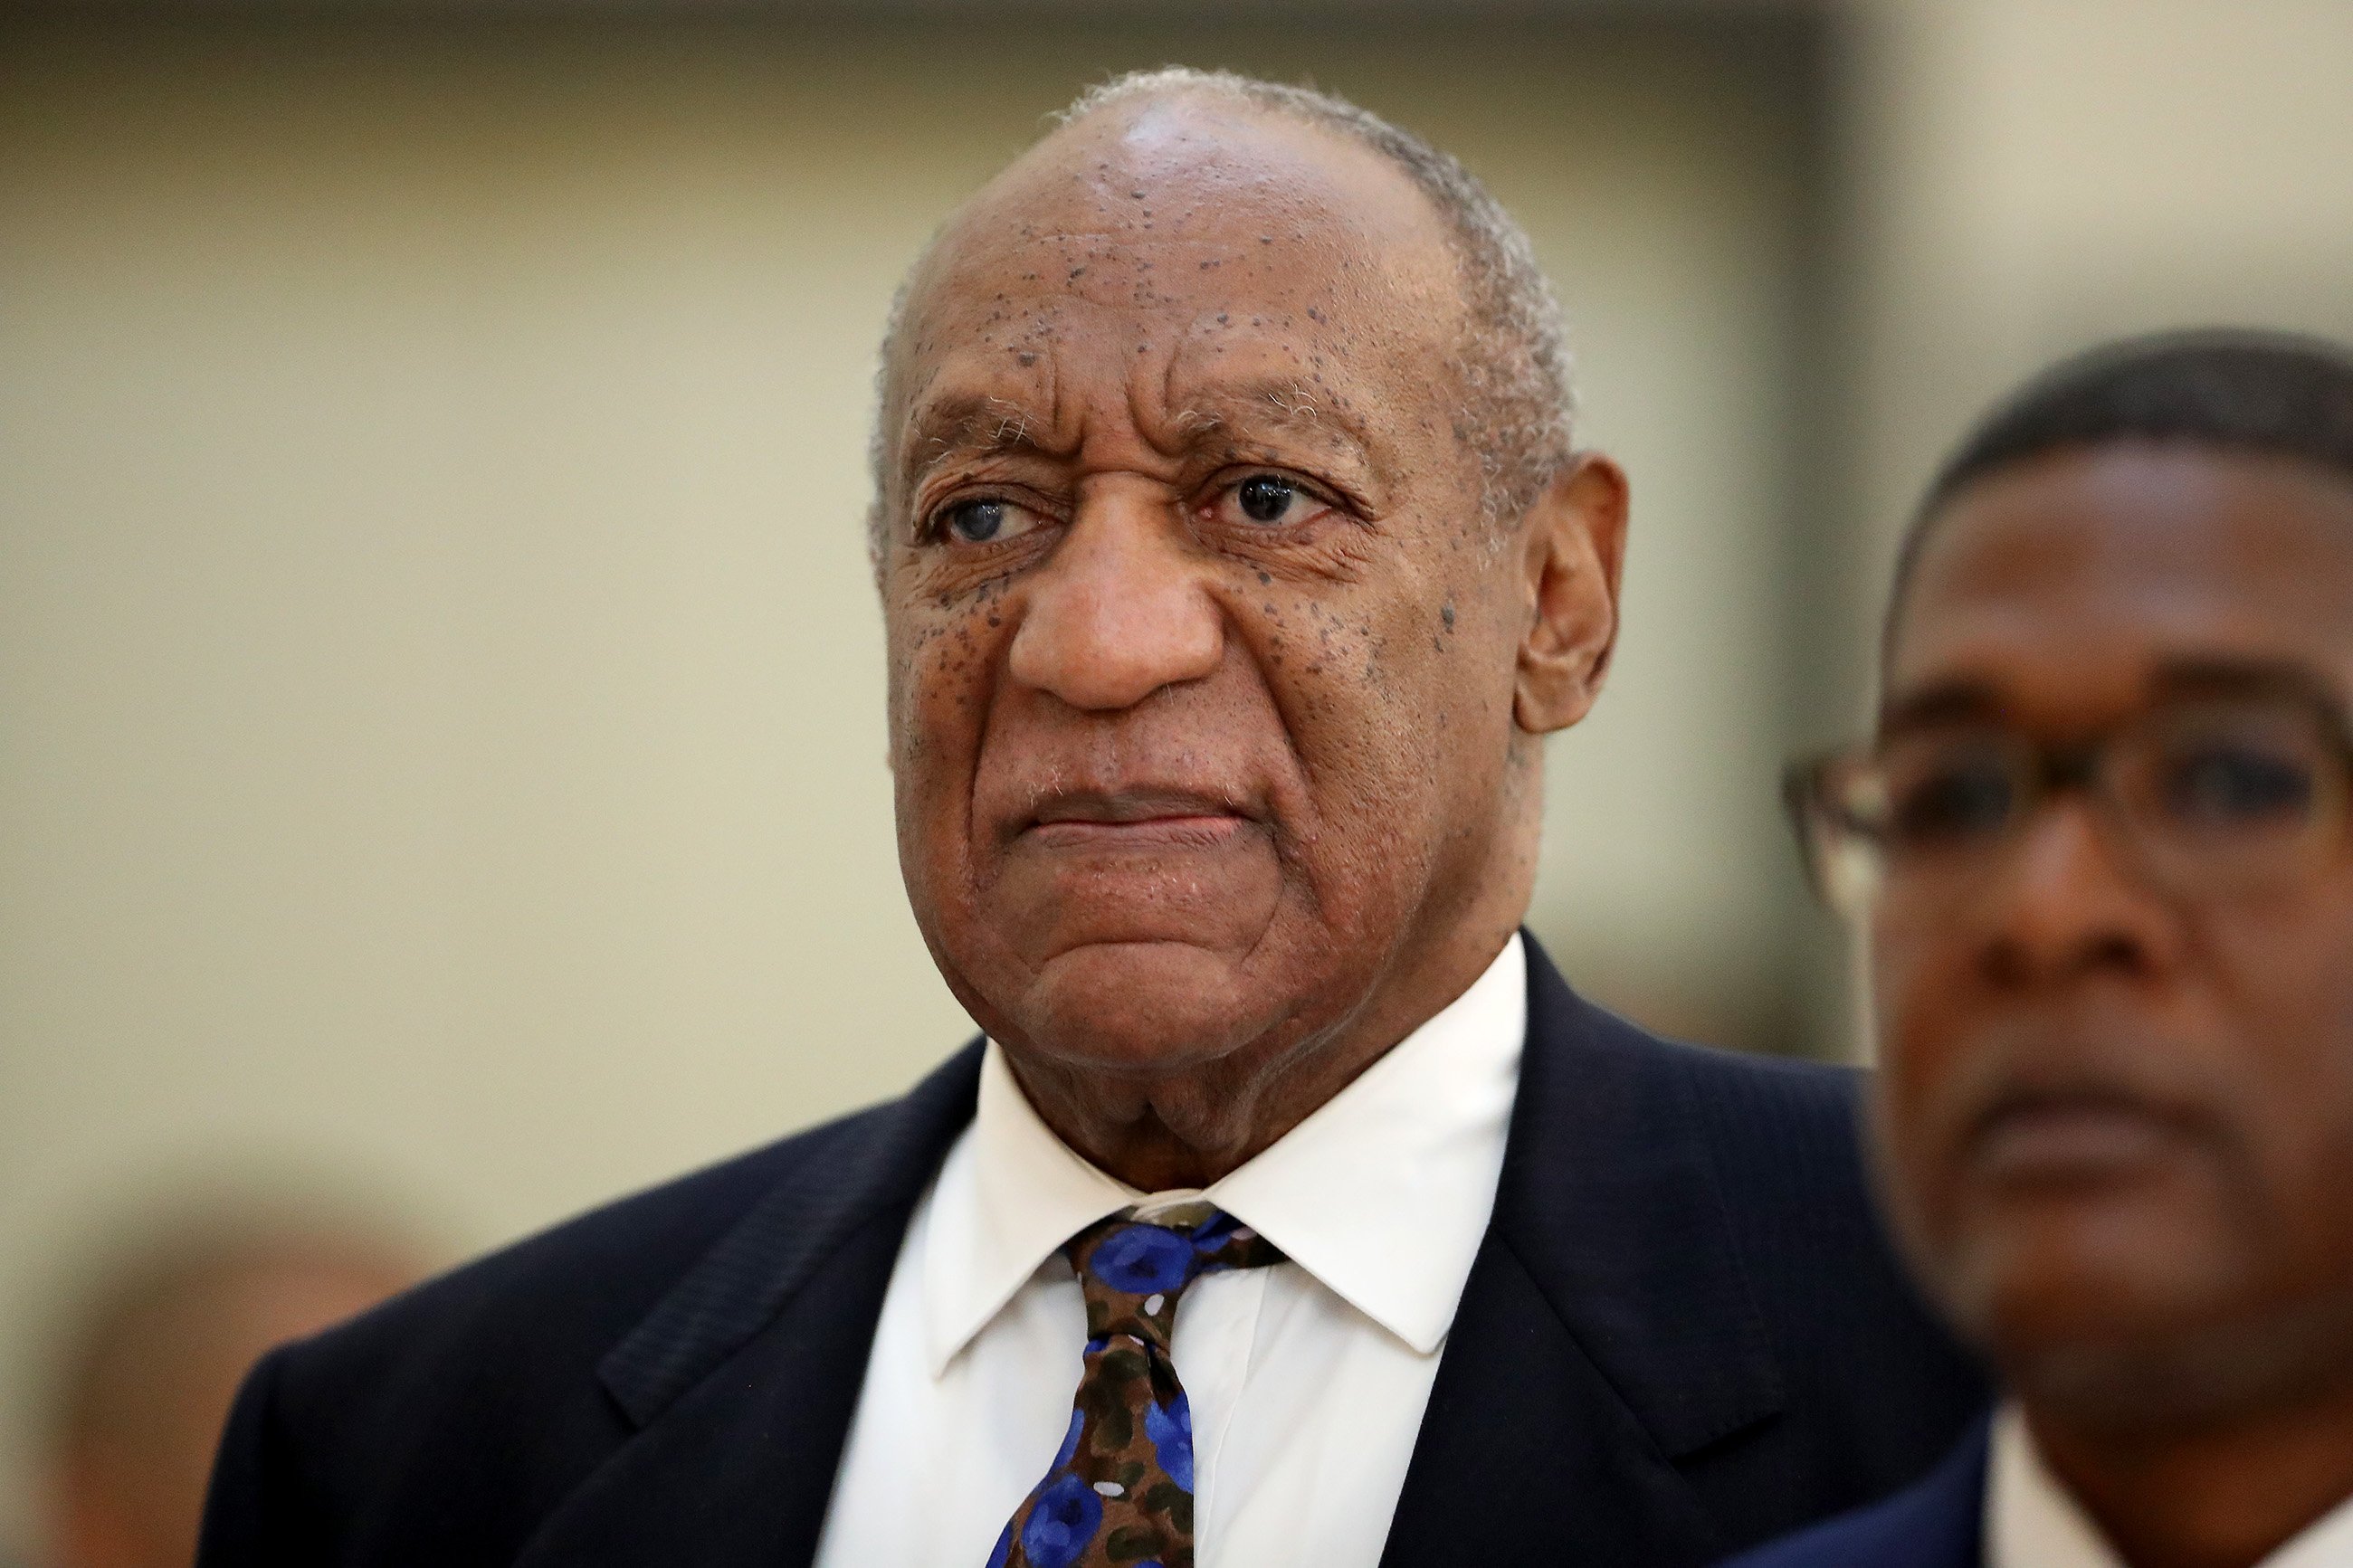 Bill Cosby during a court appearance | Photo: Getty Images